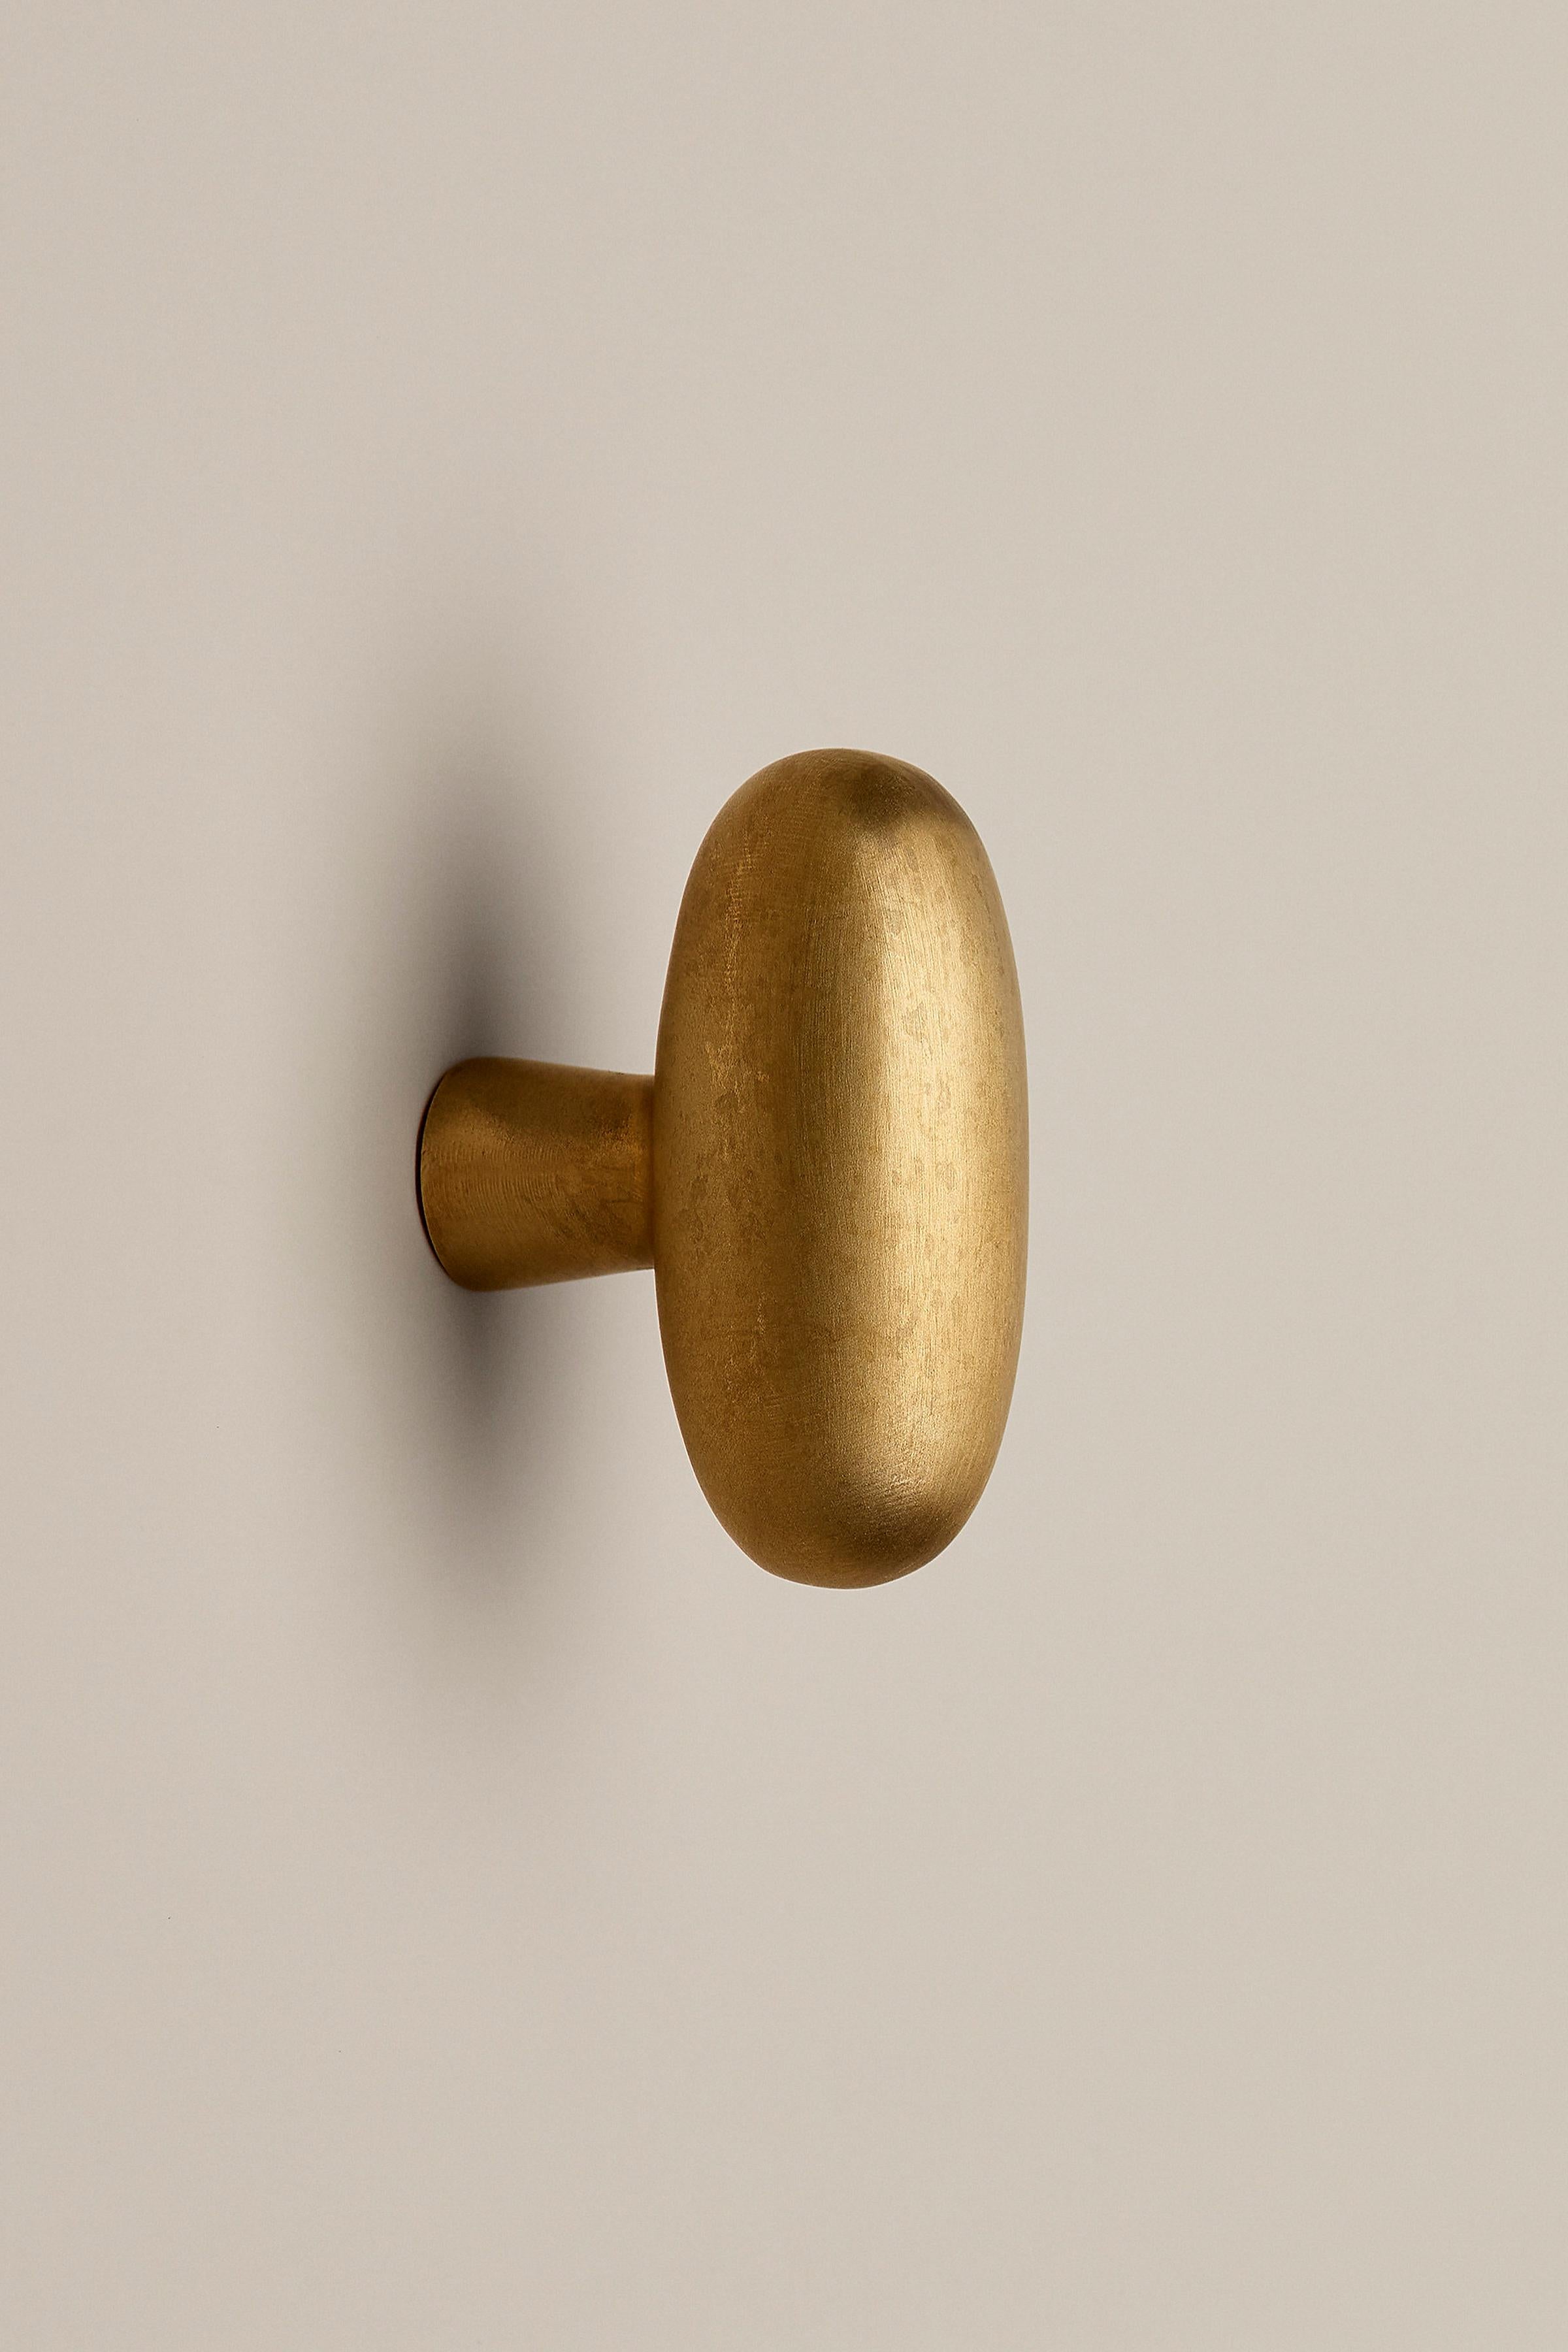 Contemporary Door Handle / Knob 'Blunt' by Spaces Within, Dark Brass For Sale 5